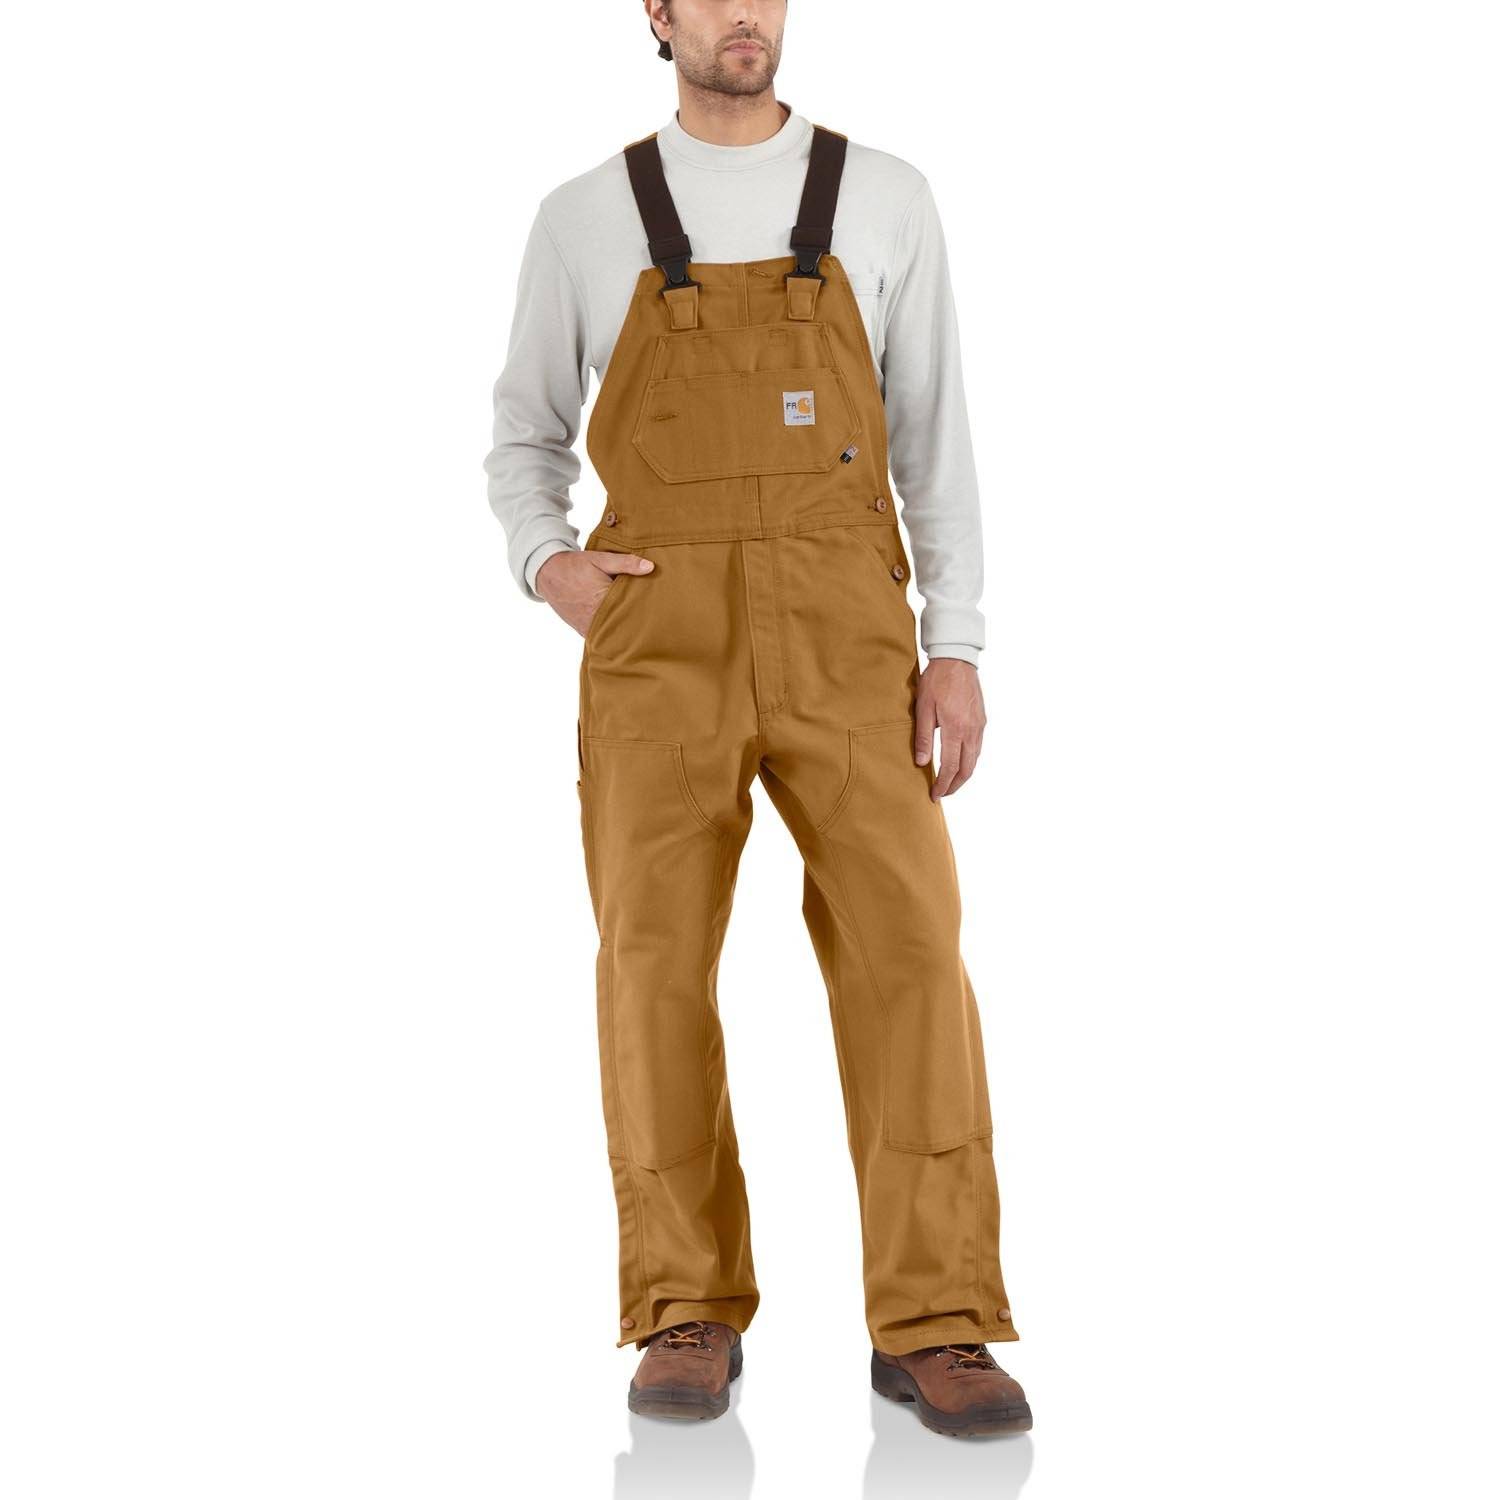 CARHARTT FLAME-RESISTANT UNLINED DUCK BIB OVERALL